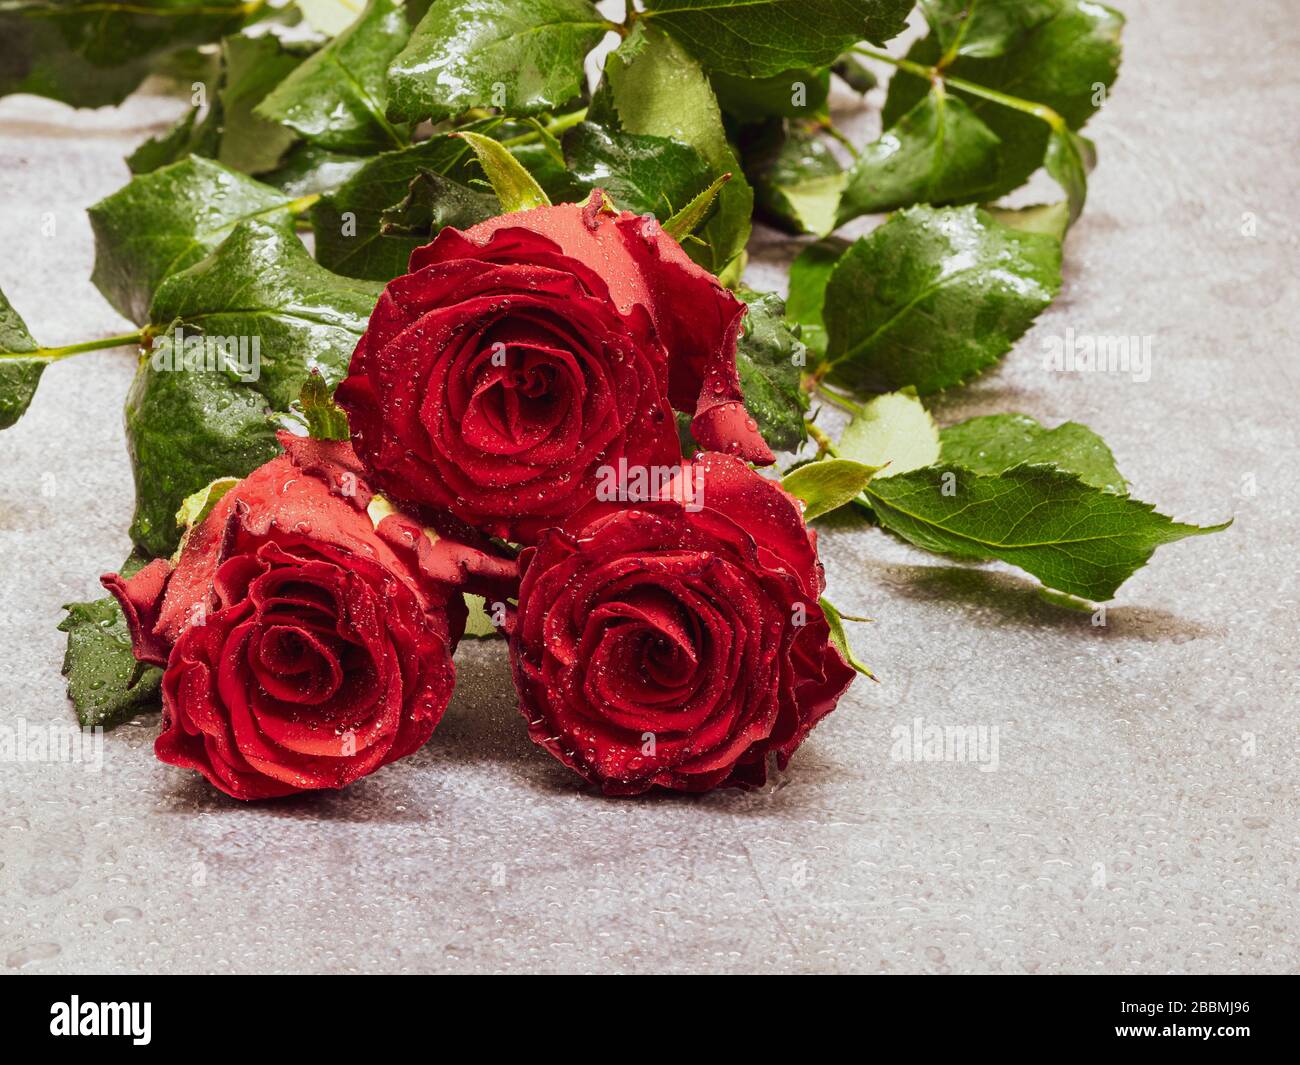 Close-up shot of trhee red roses Stock Photo